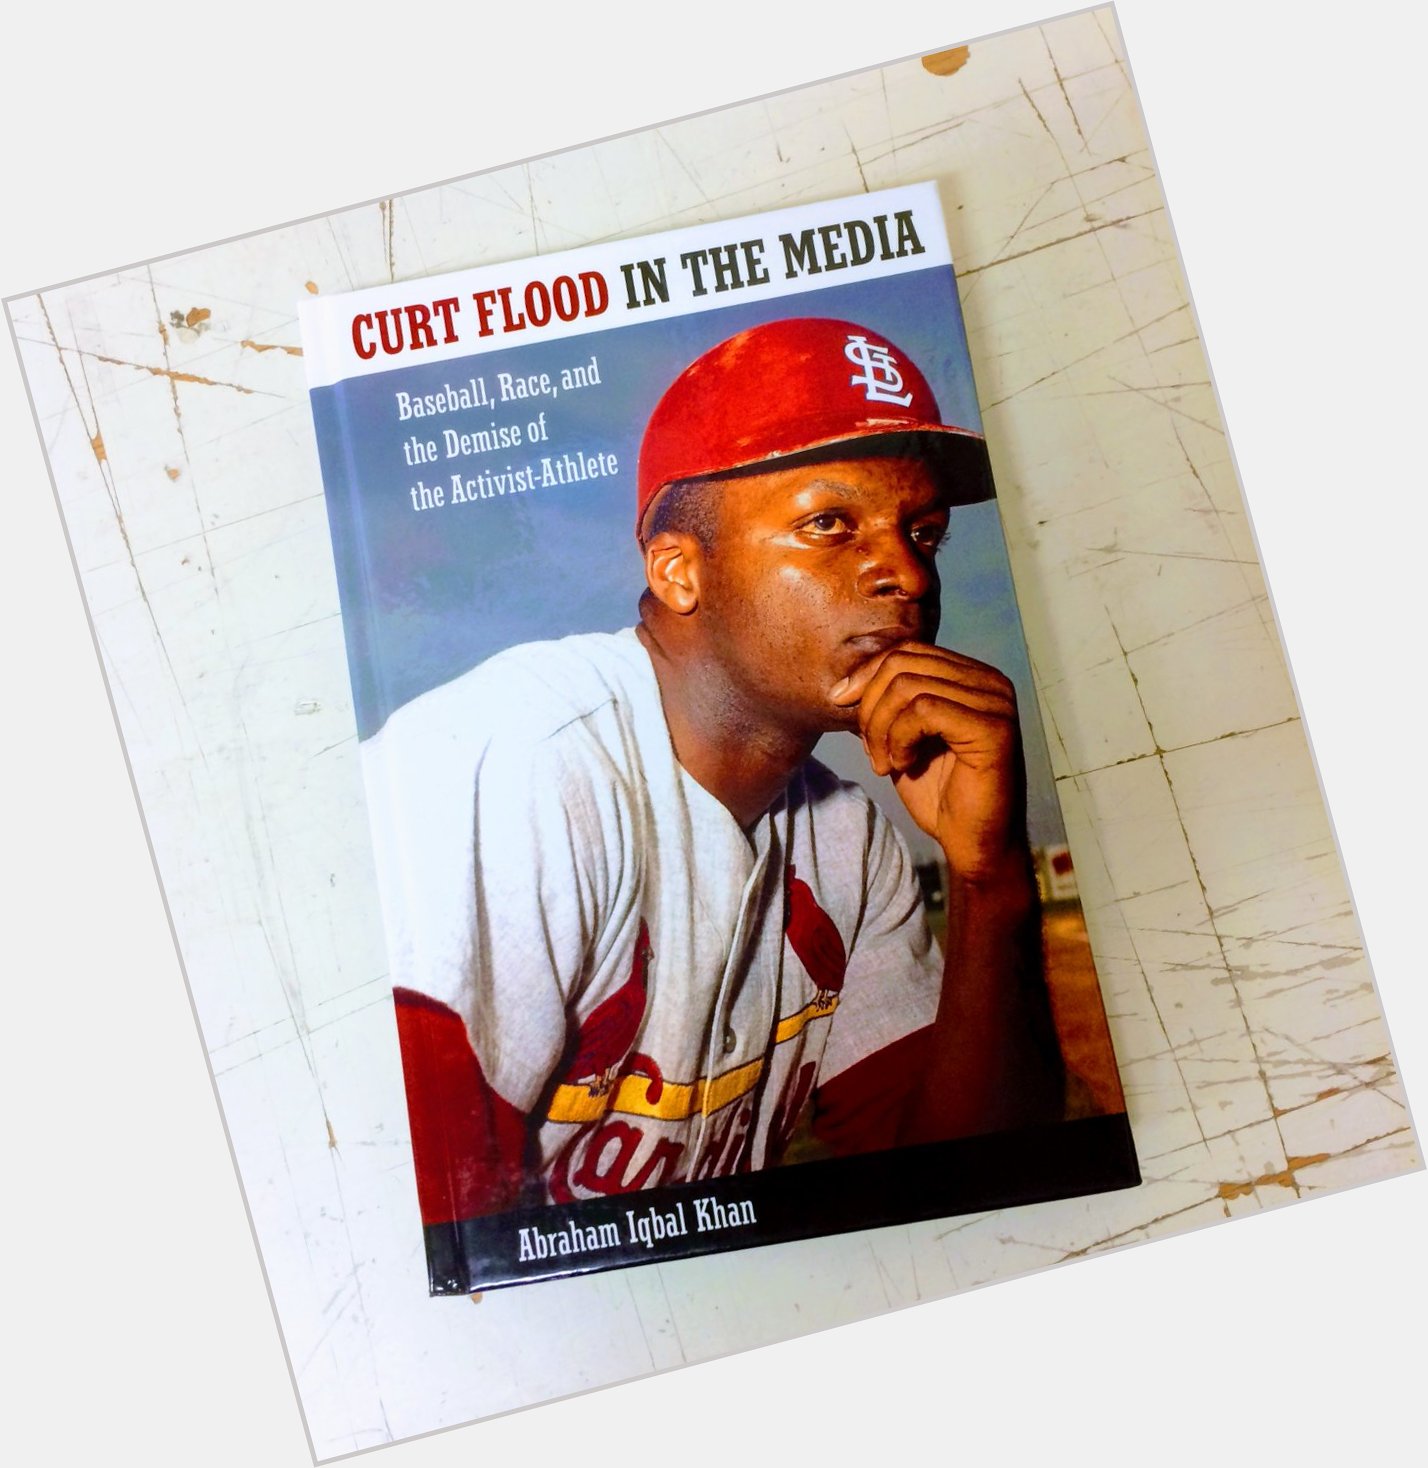 Happy Birthday to Curt Flood! Born on this day in 1938, the influential baseball player would have been 79. 